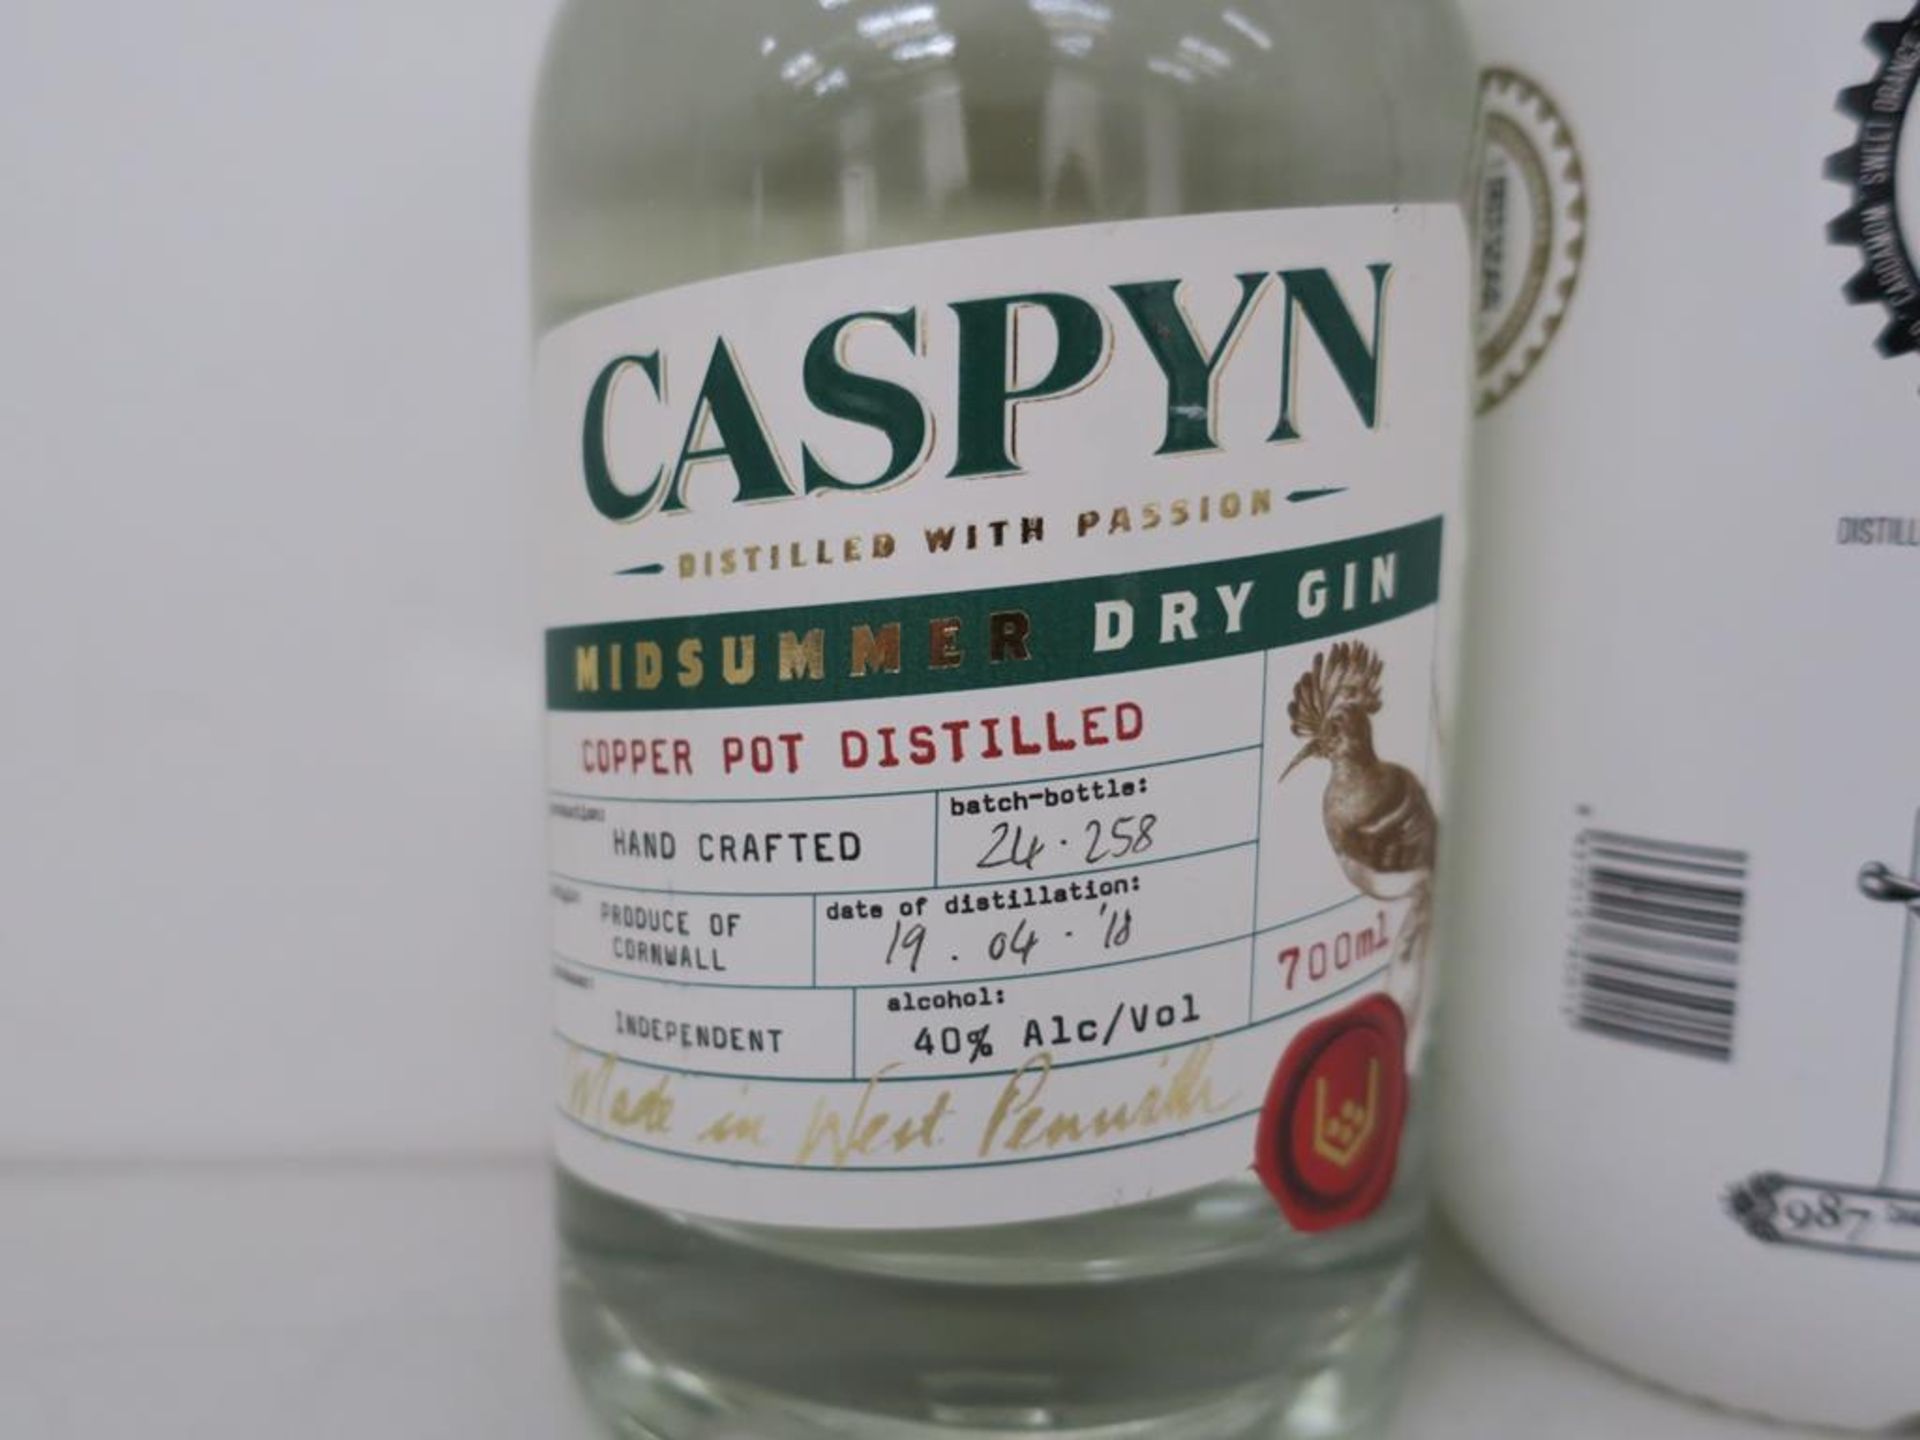 * Three bottles of Gin: a 70cl bottle of Caspyn Midsummer Dry Gin 40% vol, a 70cl bottle of 987 - Image 4 of 7